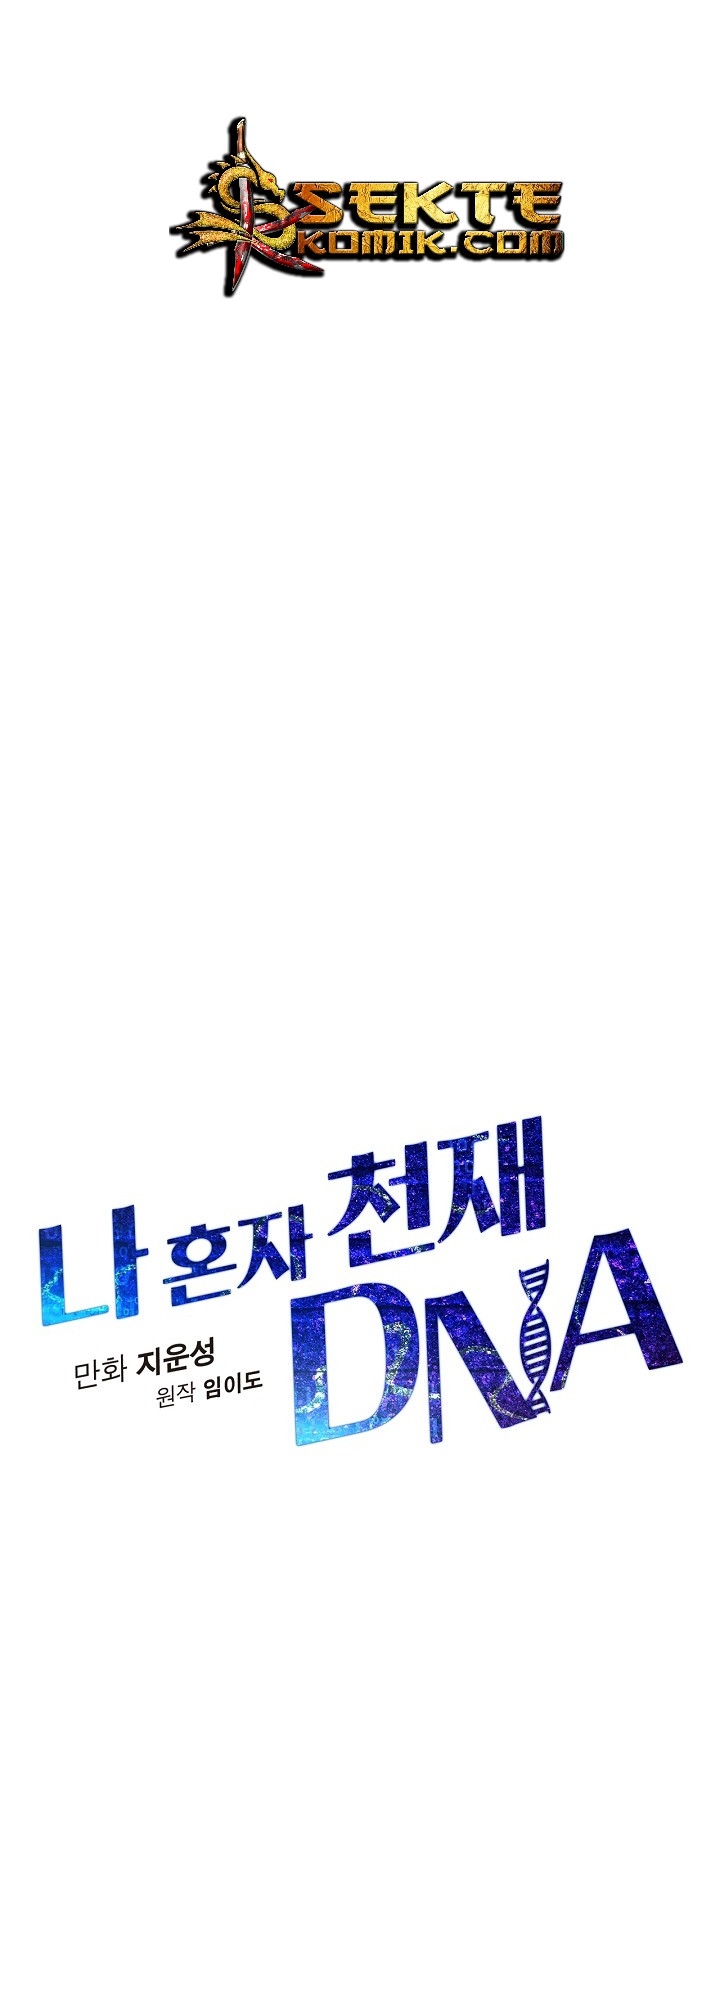 I Am Alone Genius DNA Chapter 2